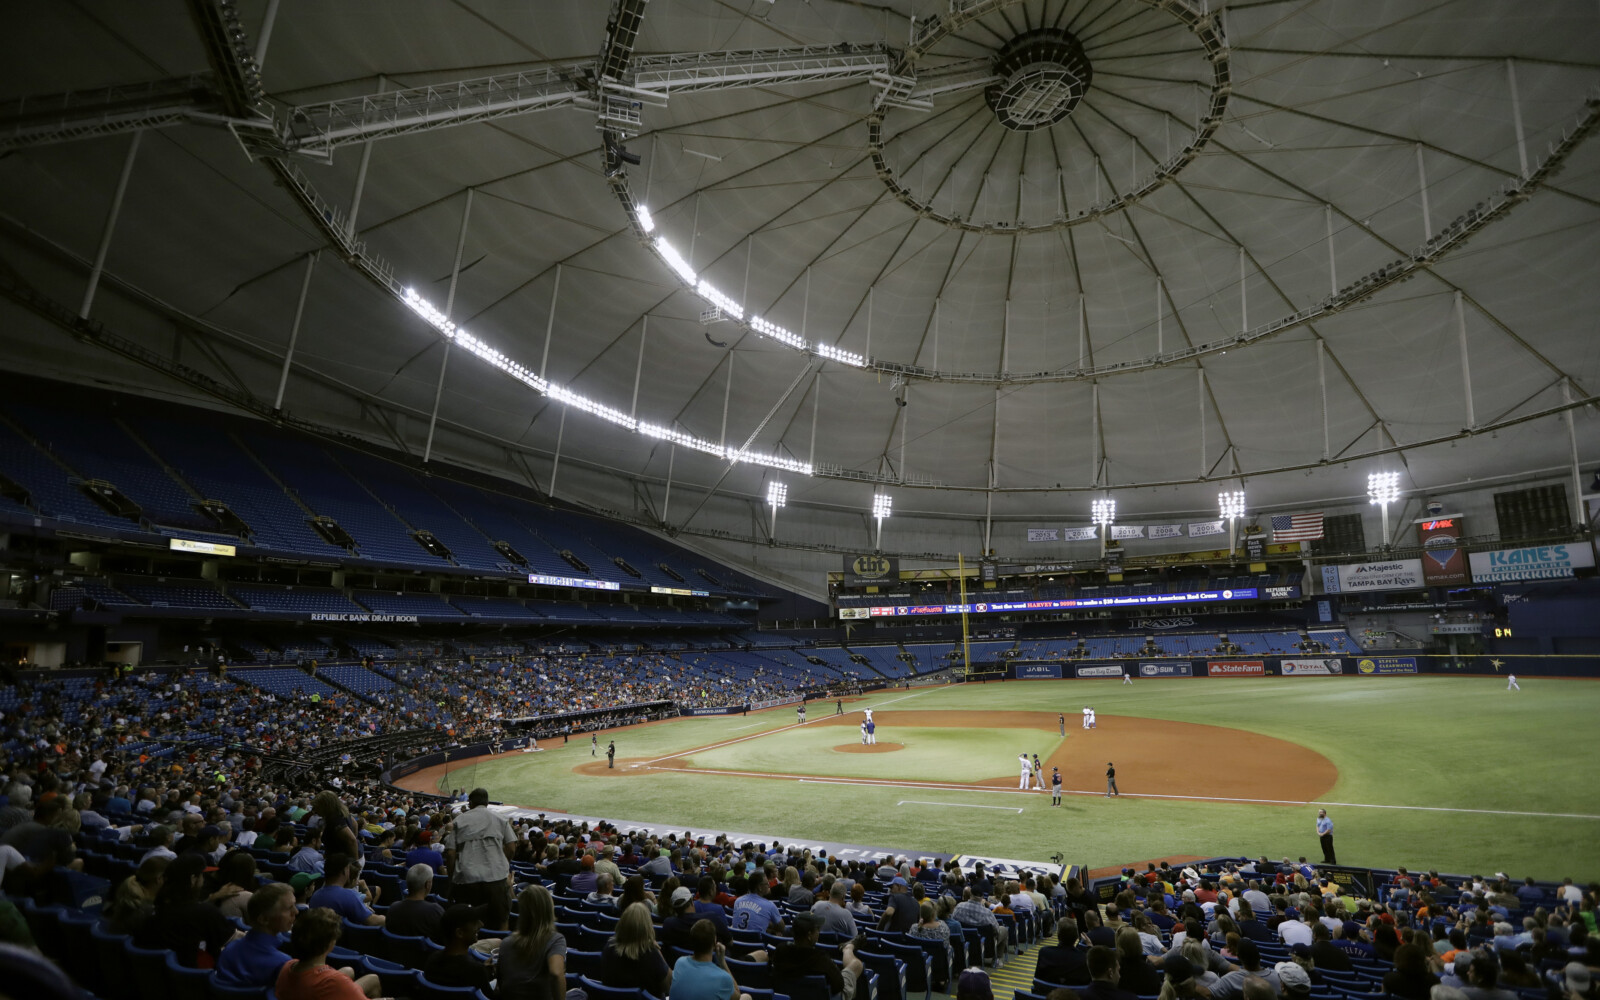 New St. Petersburg Ballpark Could Factor into Rays Tampa Bay/Montreal Plan